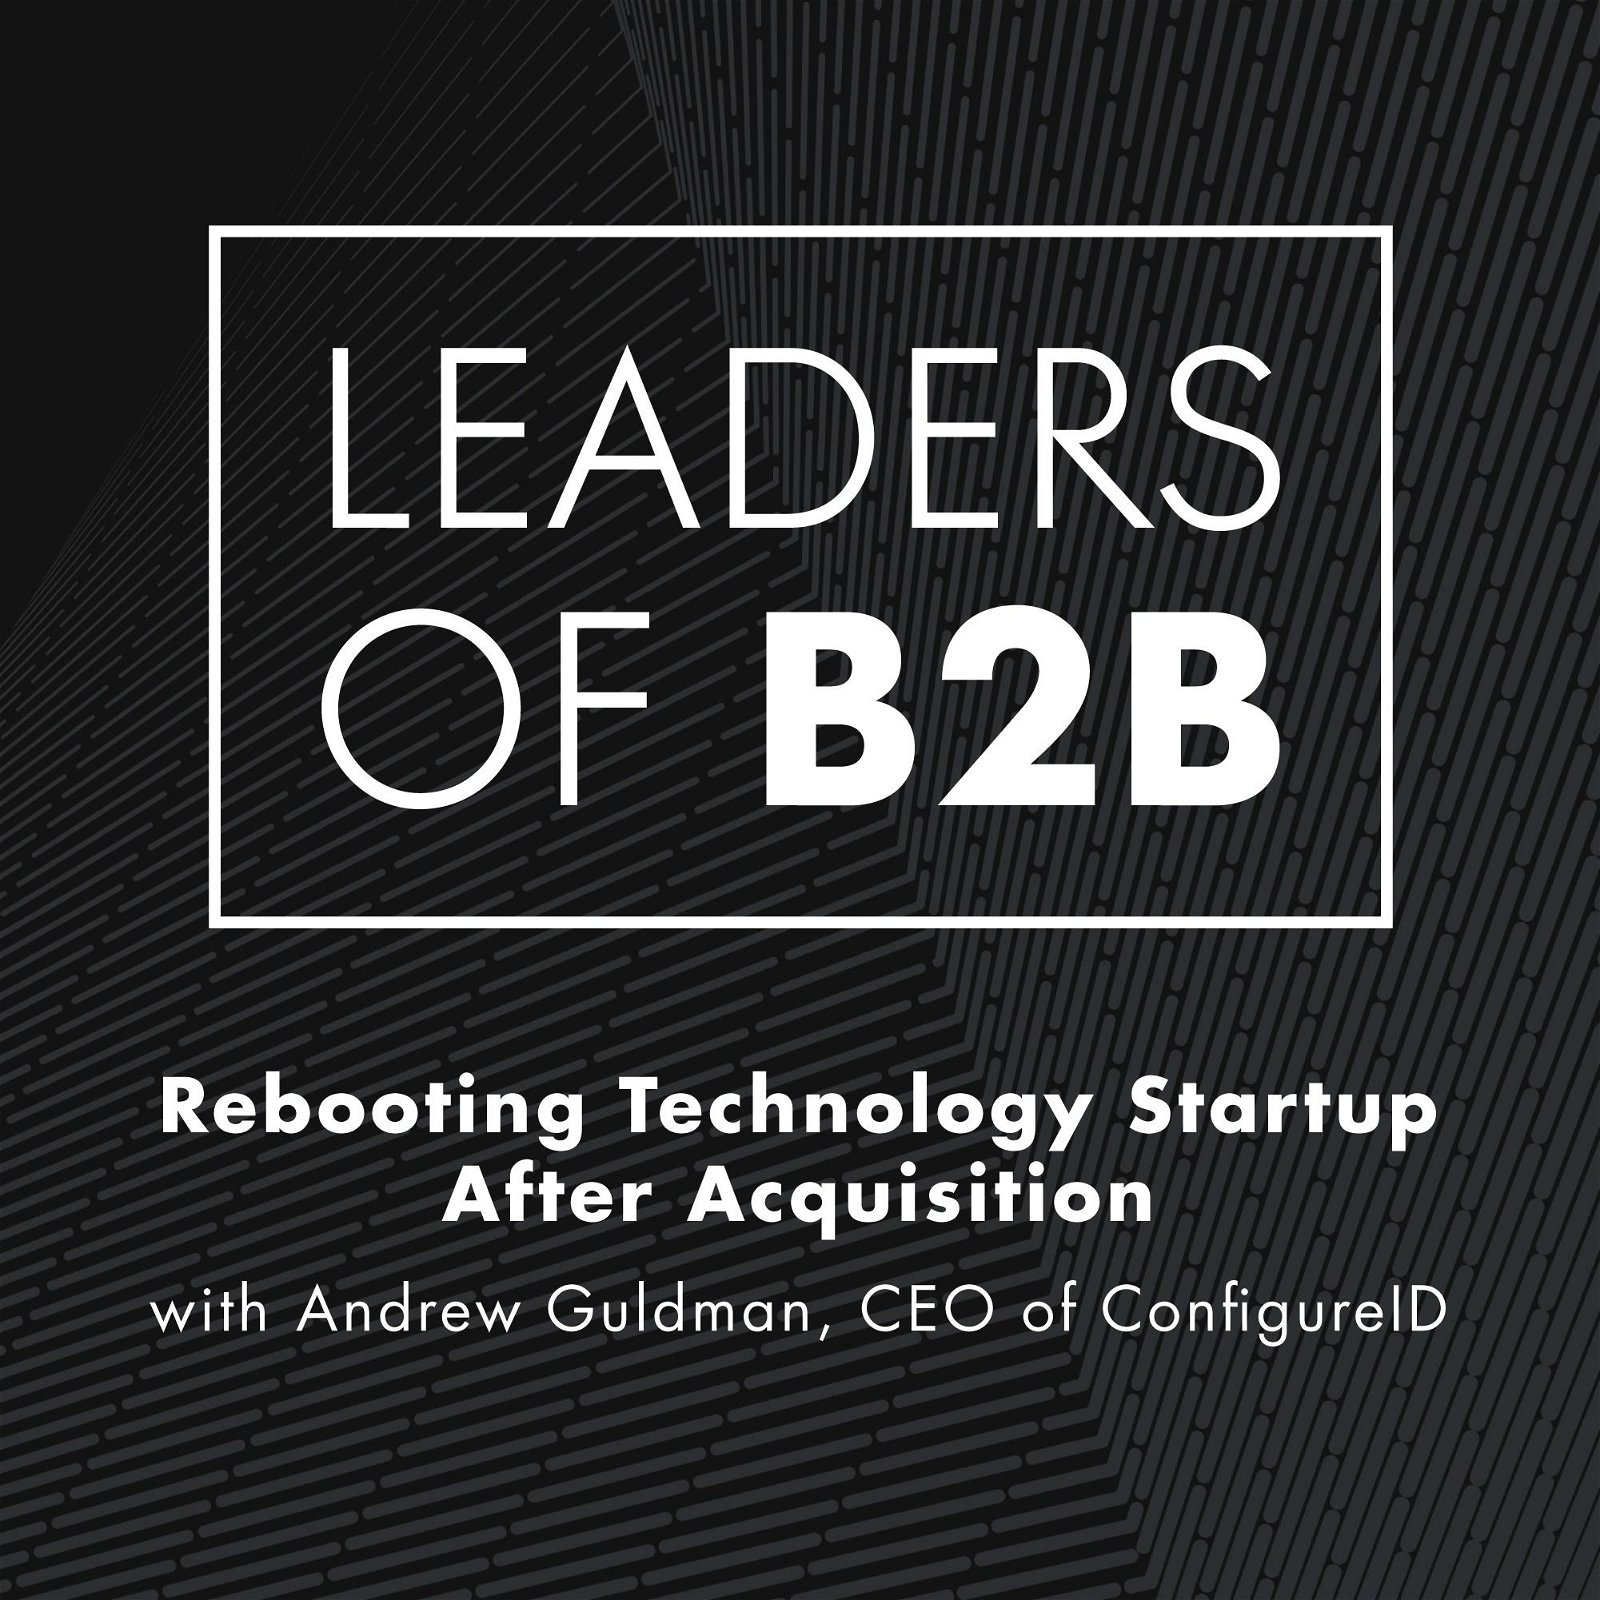 Rebooting Technology Startup After Acquisition With Andrew Guldman, CEO of ConfigureID